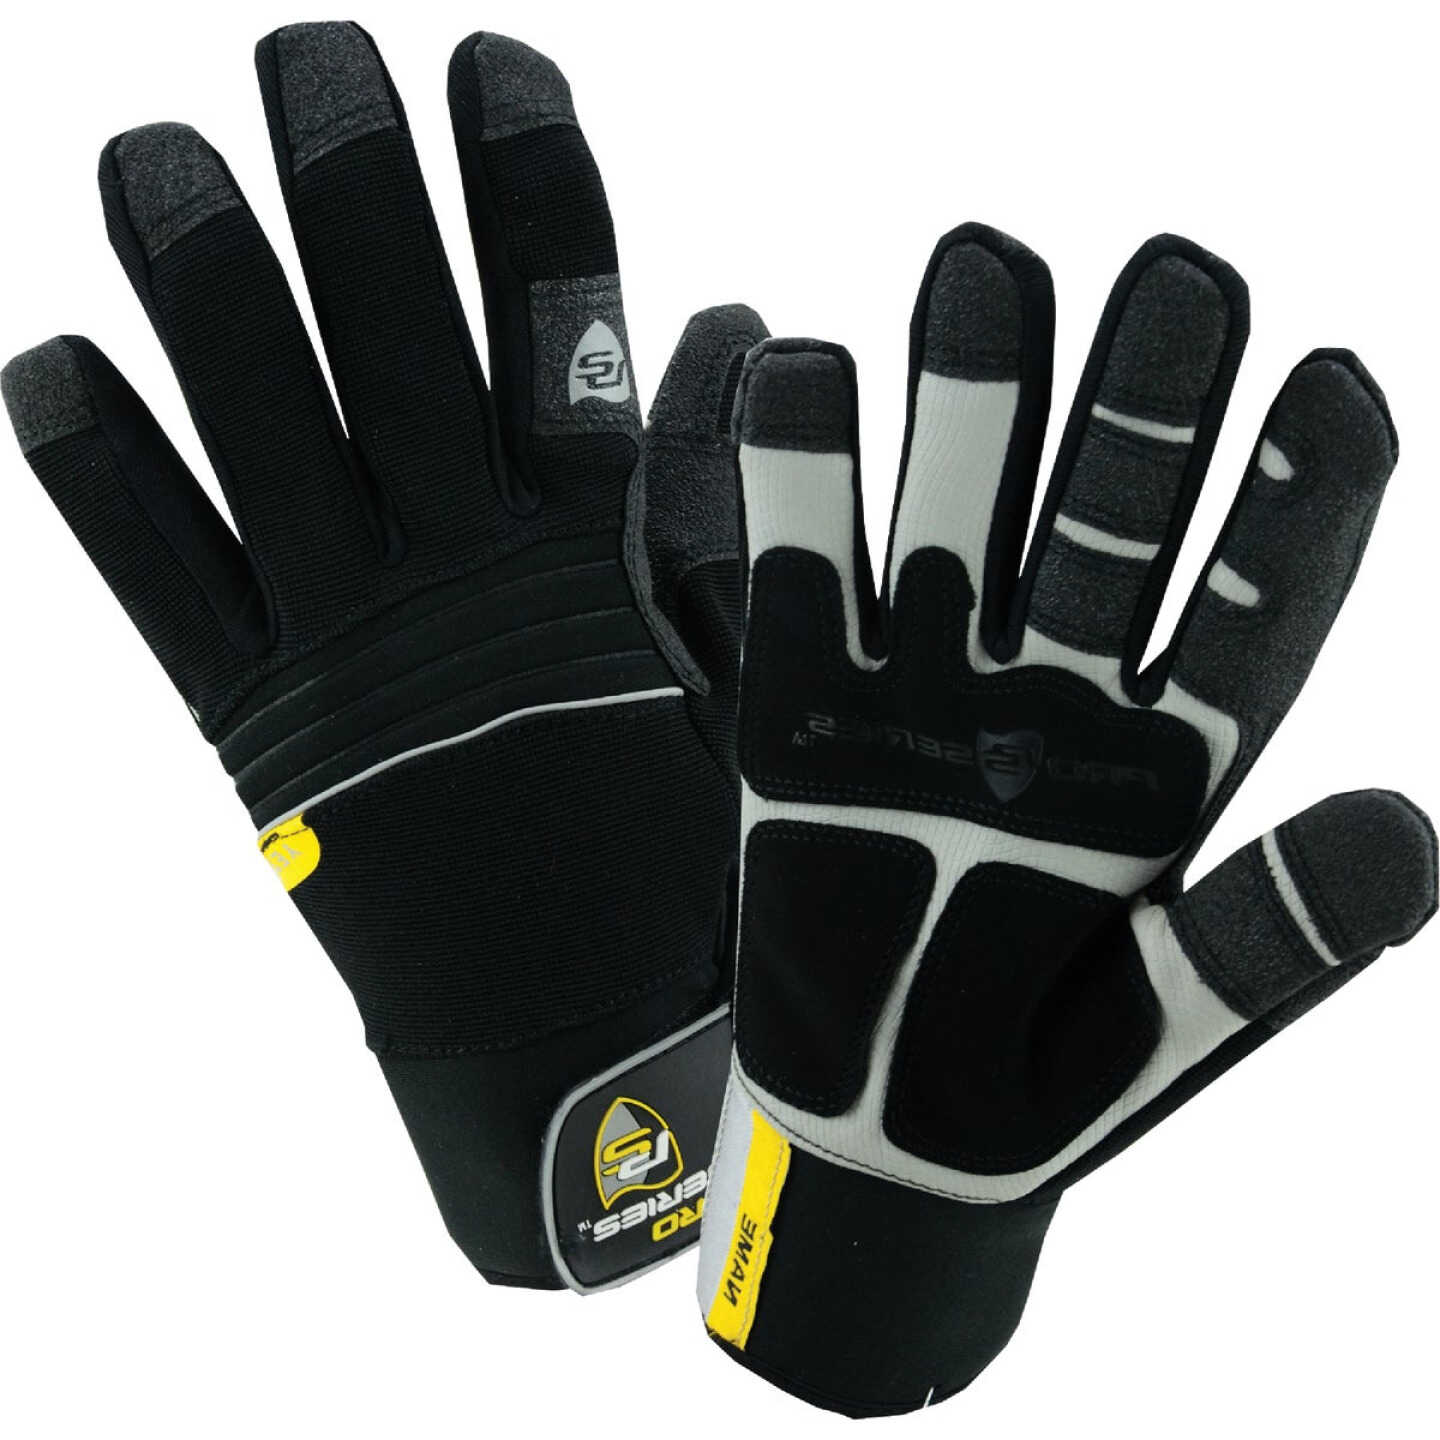 West Chester Men's XL Synthetic Leather Winter Work Glove Image 1